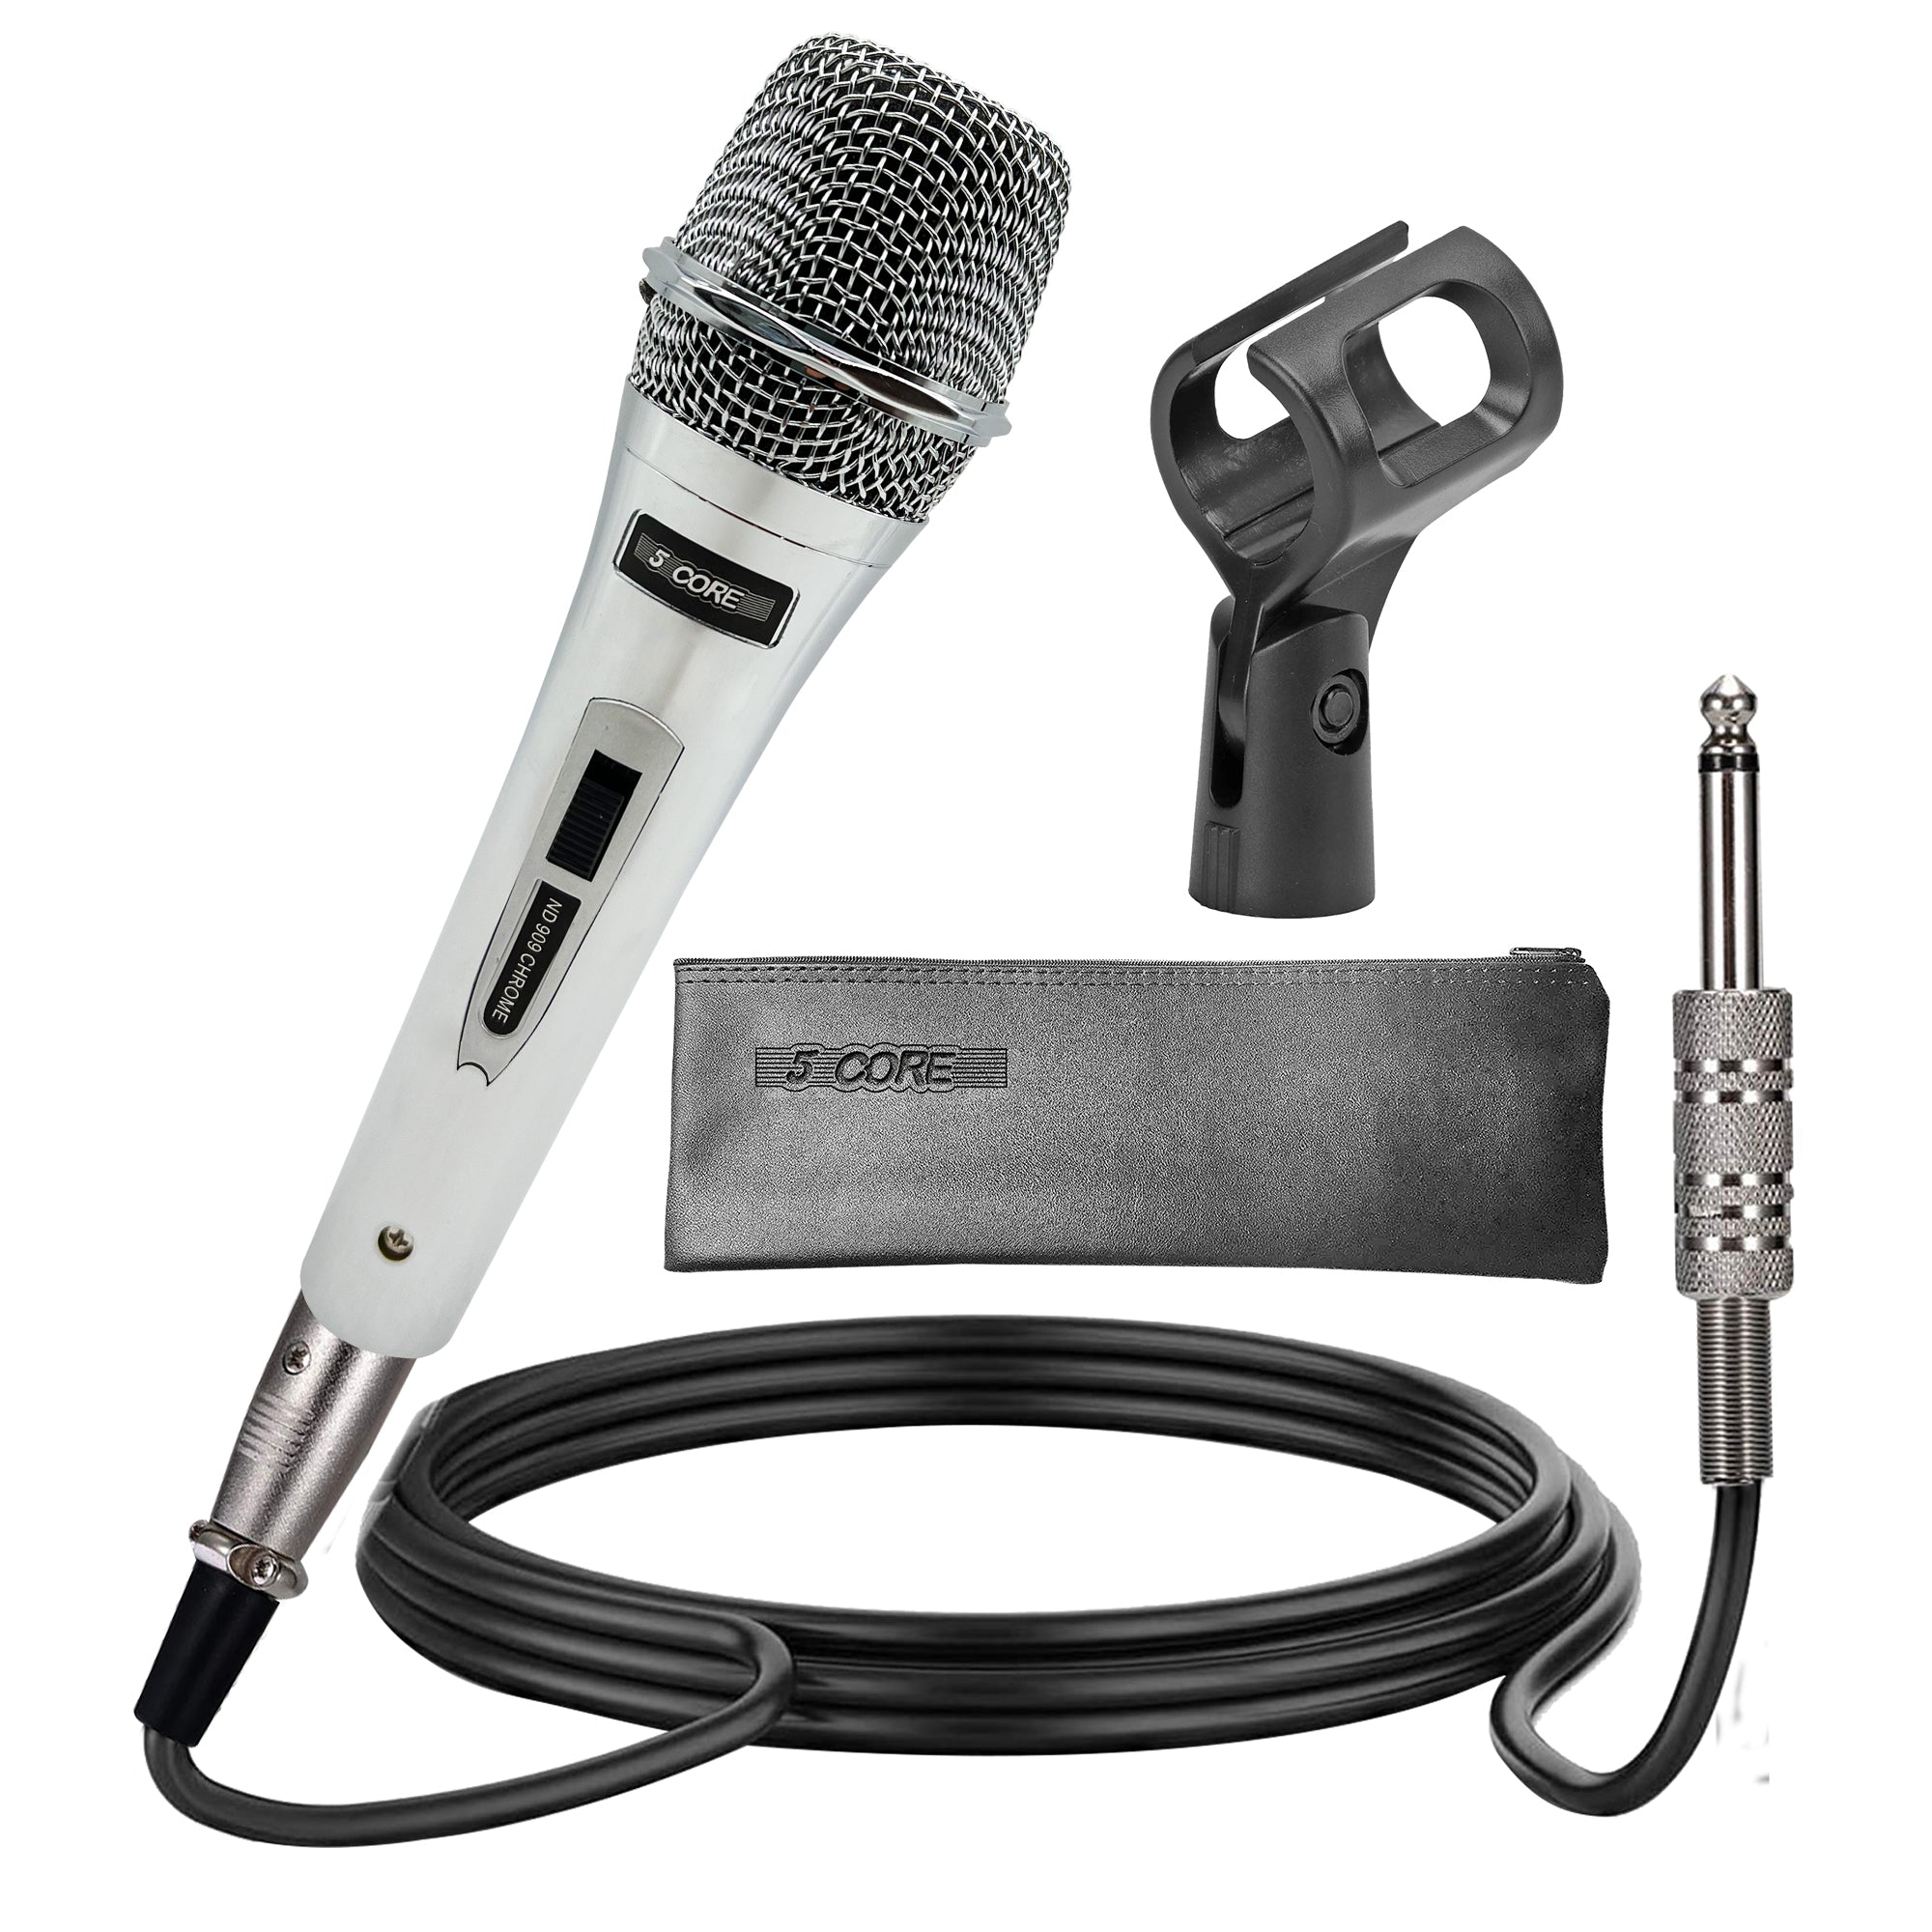 5 Core Handheld Microphone For Singing • Dynamic Neodymium Cardioid Unidirectional Vocal Mic